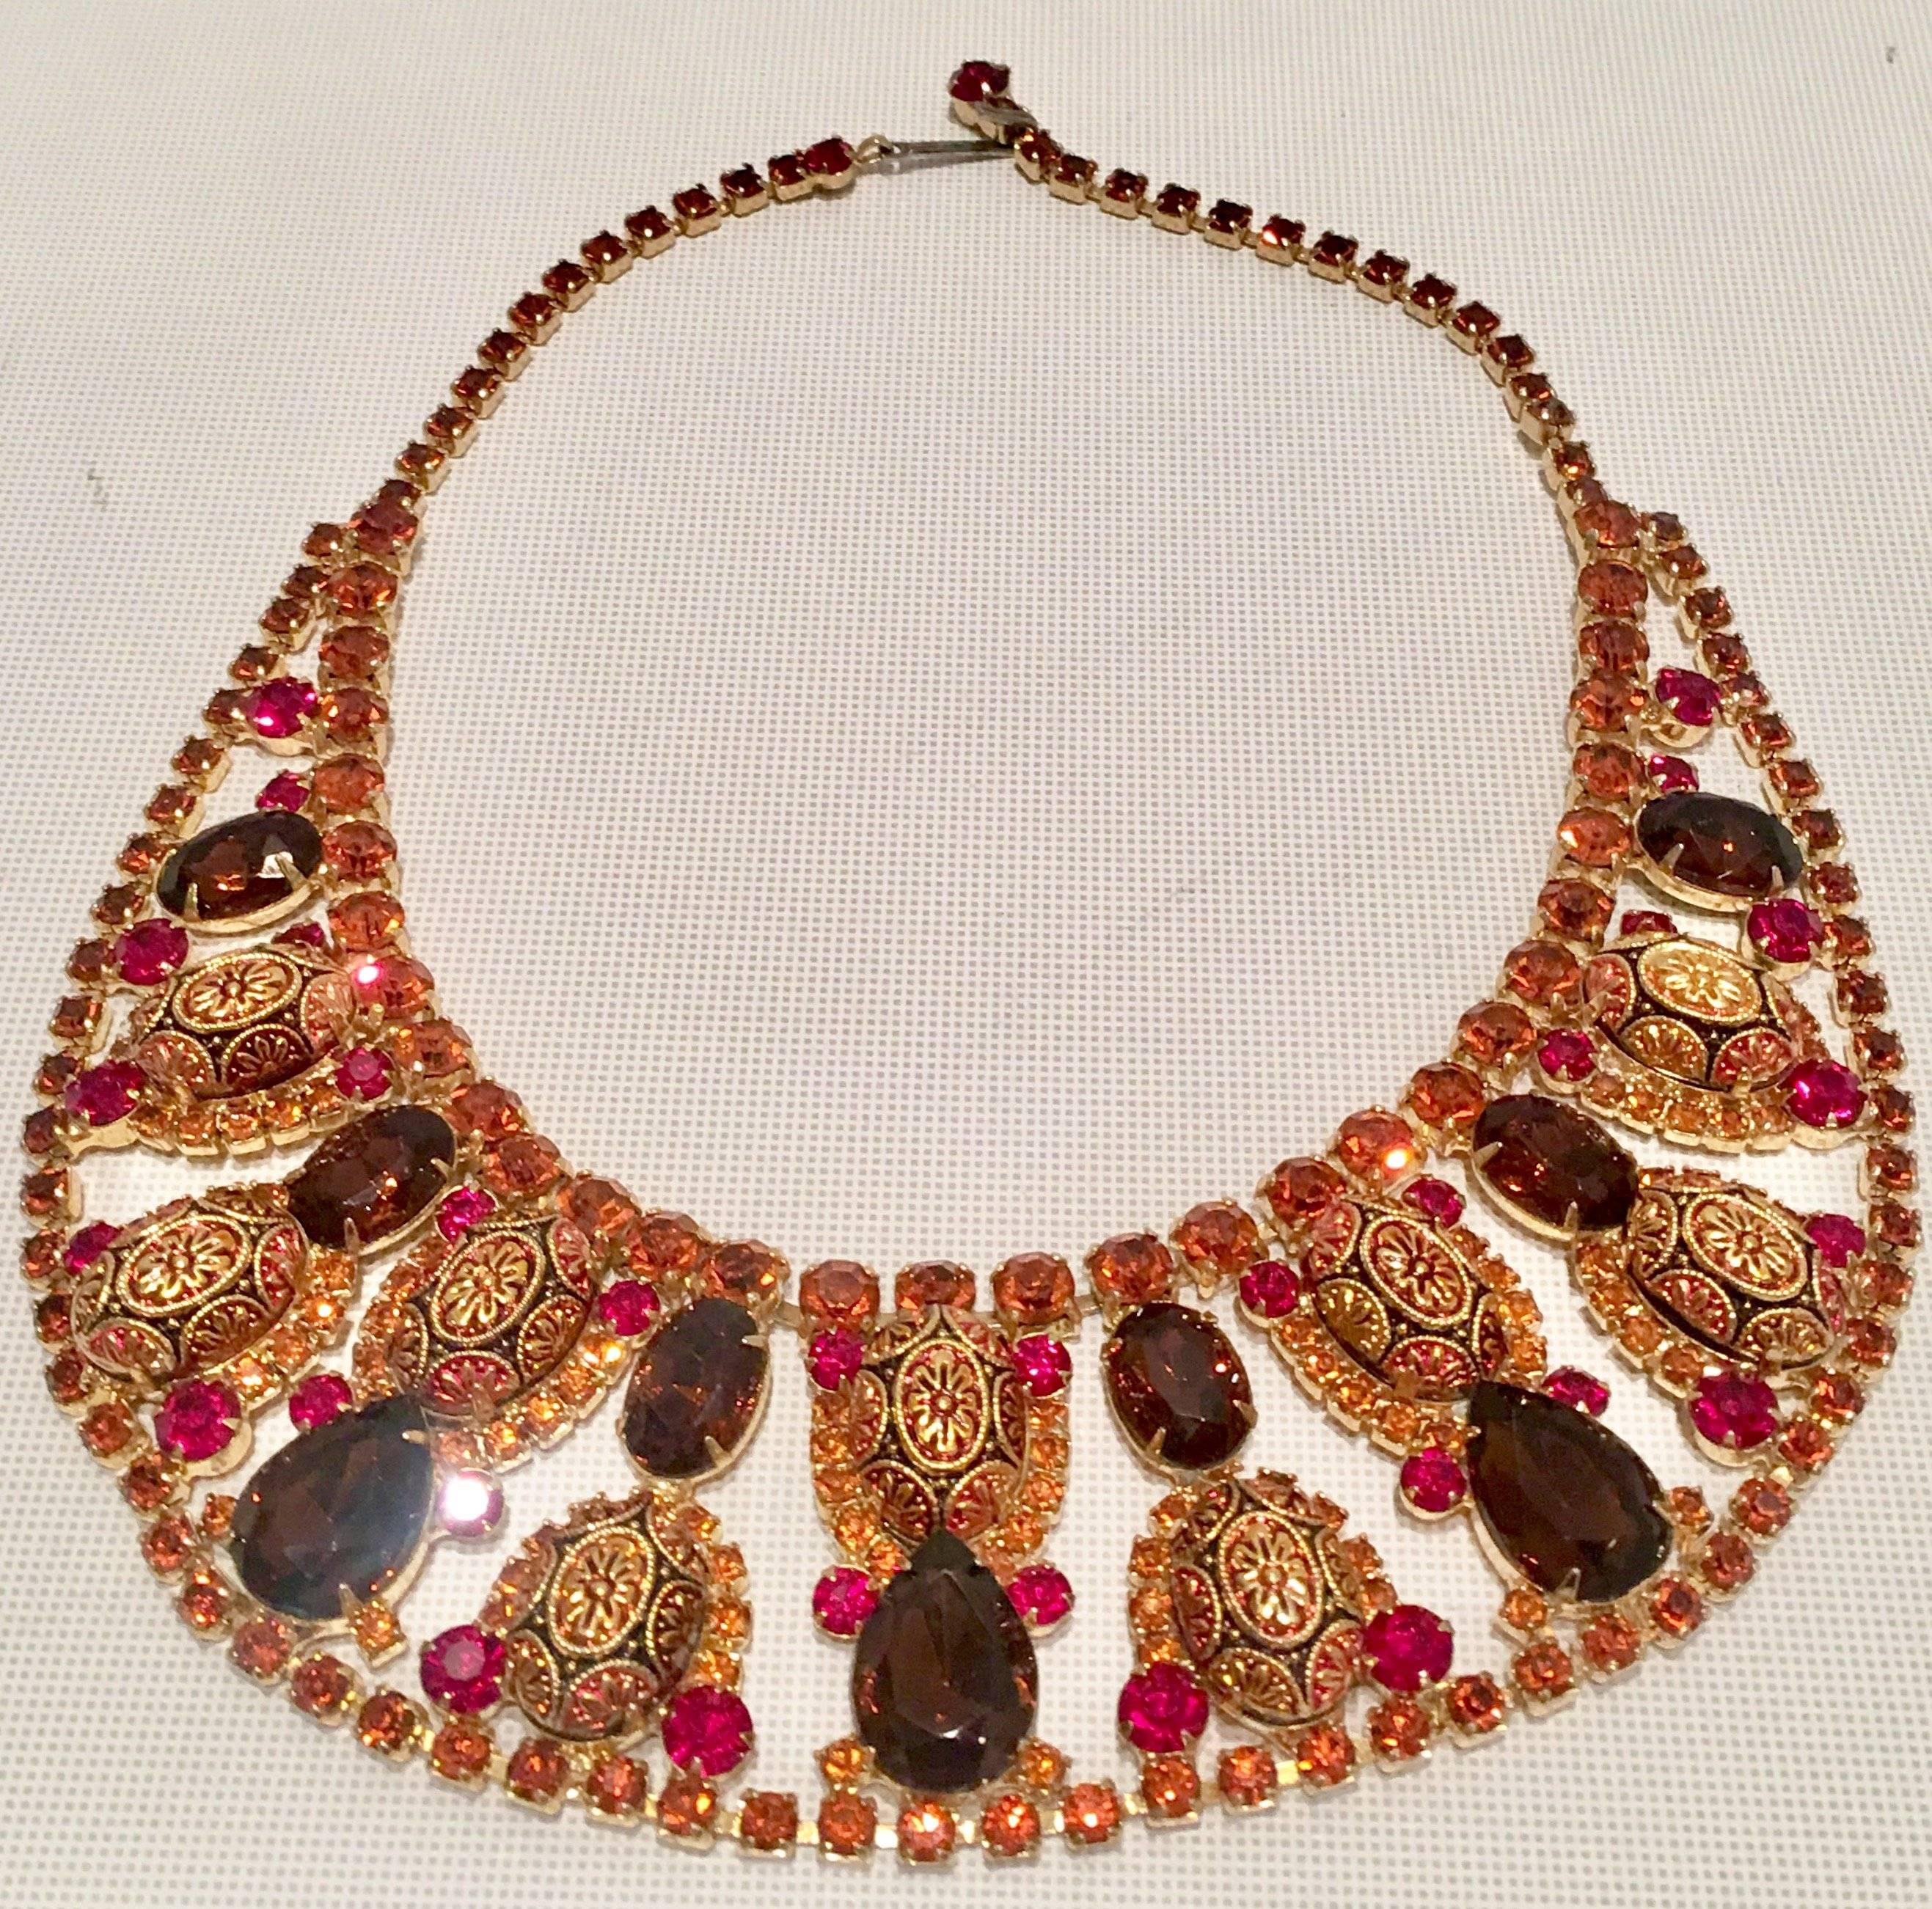 Women's Vintage Juliana Cleopatra Collar Crystal and Gold Necklace by Delizza & Elster